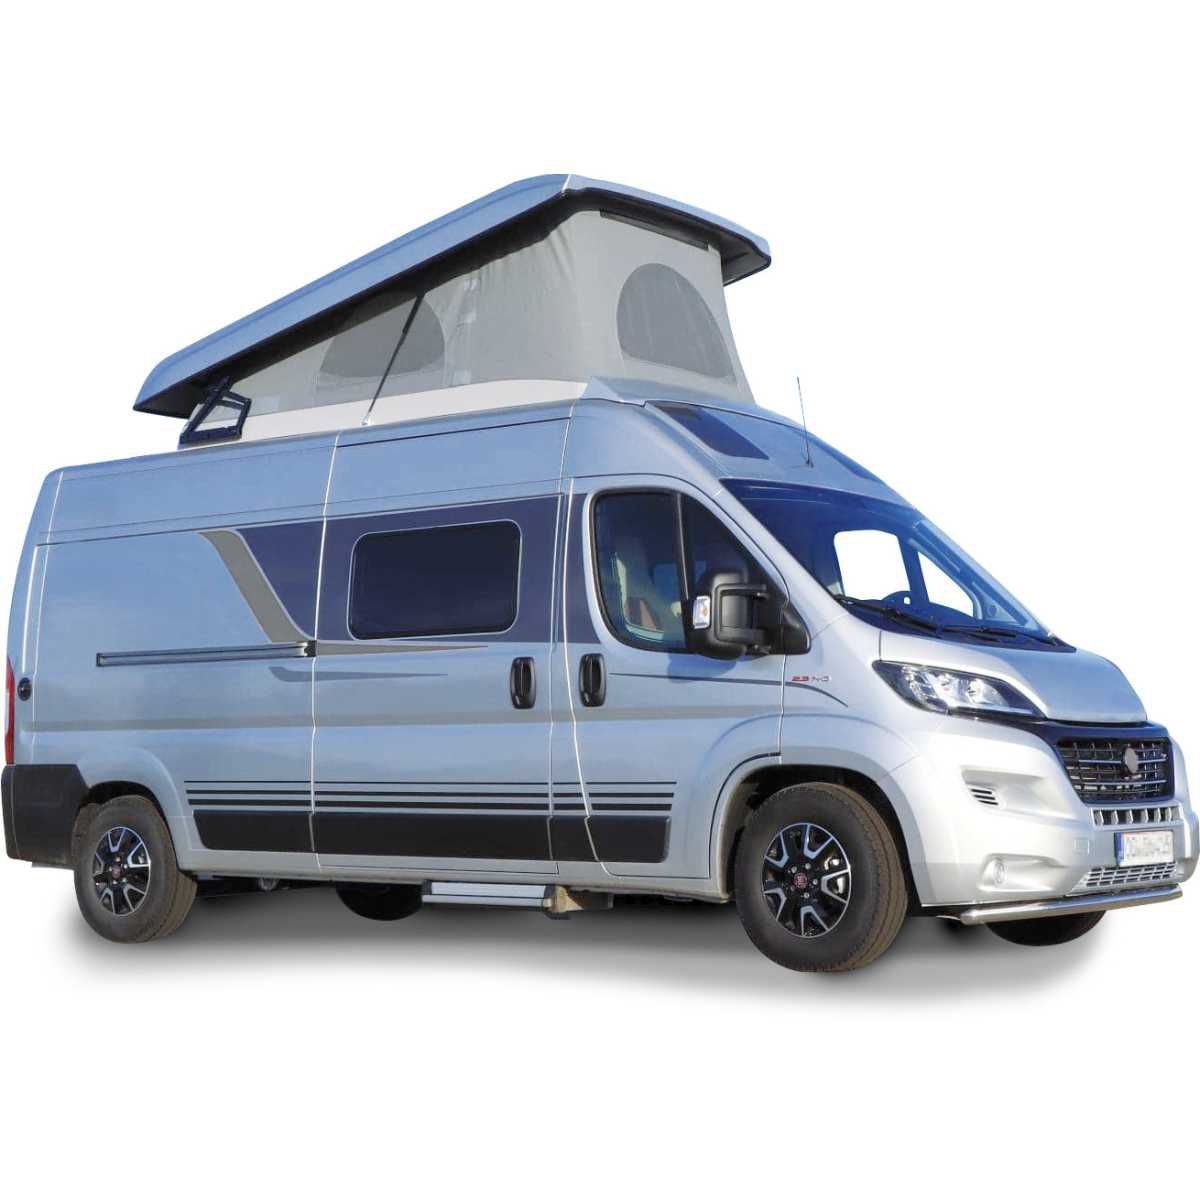 CLAIRVAL Thermomatte THERMICAMP Roof TRIGANO Skyroof auf Fiat Ducato ab Bj- 09-2021 Art- Nr. LTMTRIG02